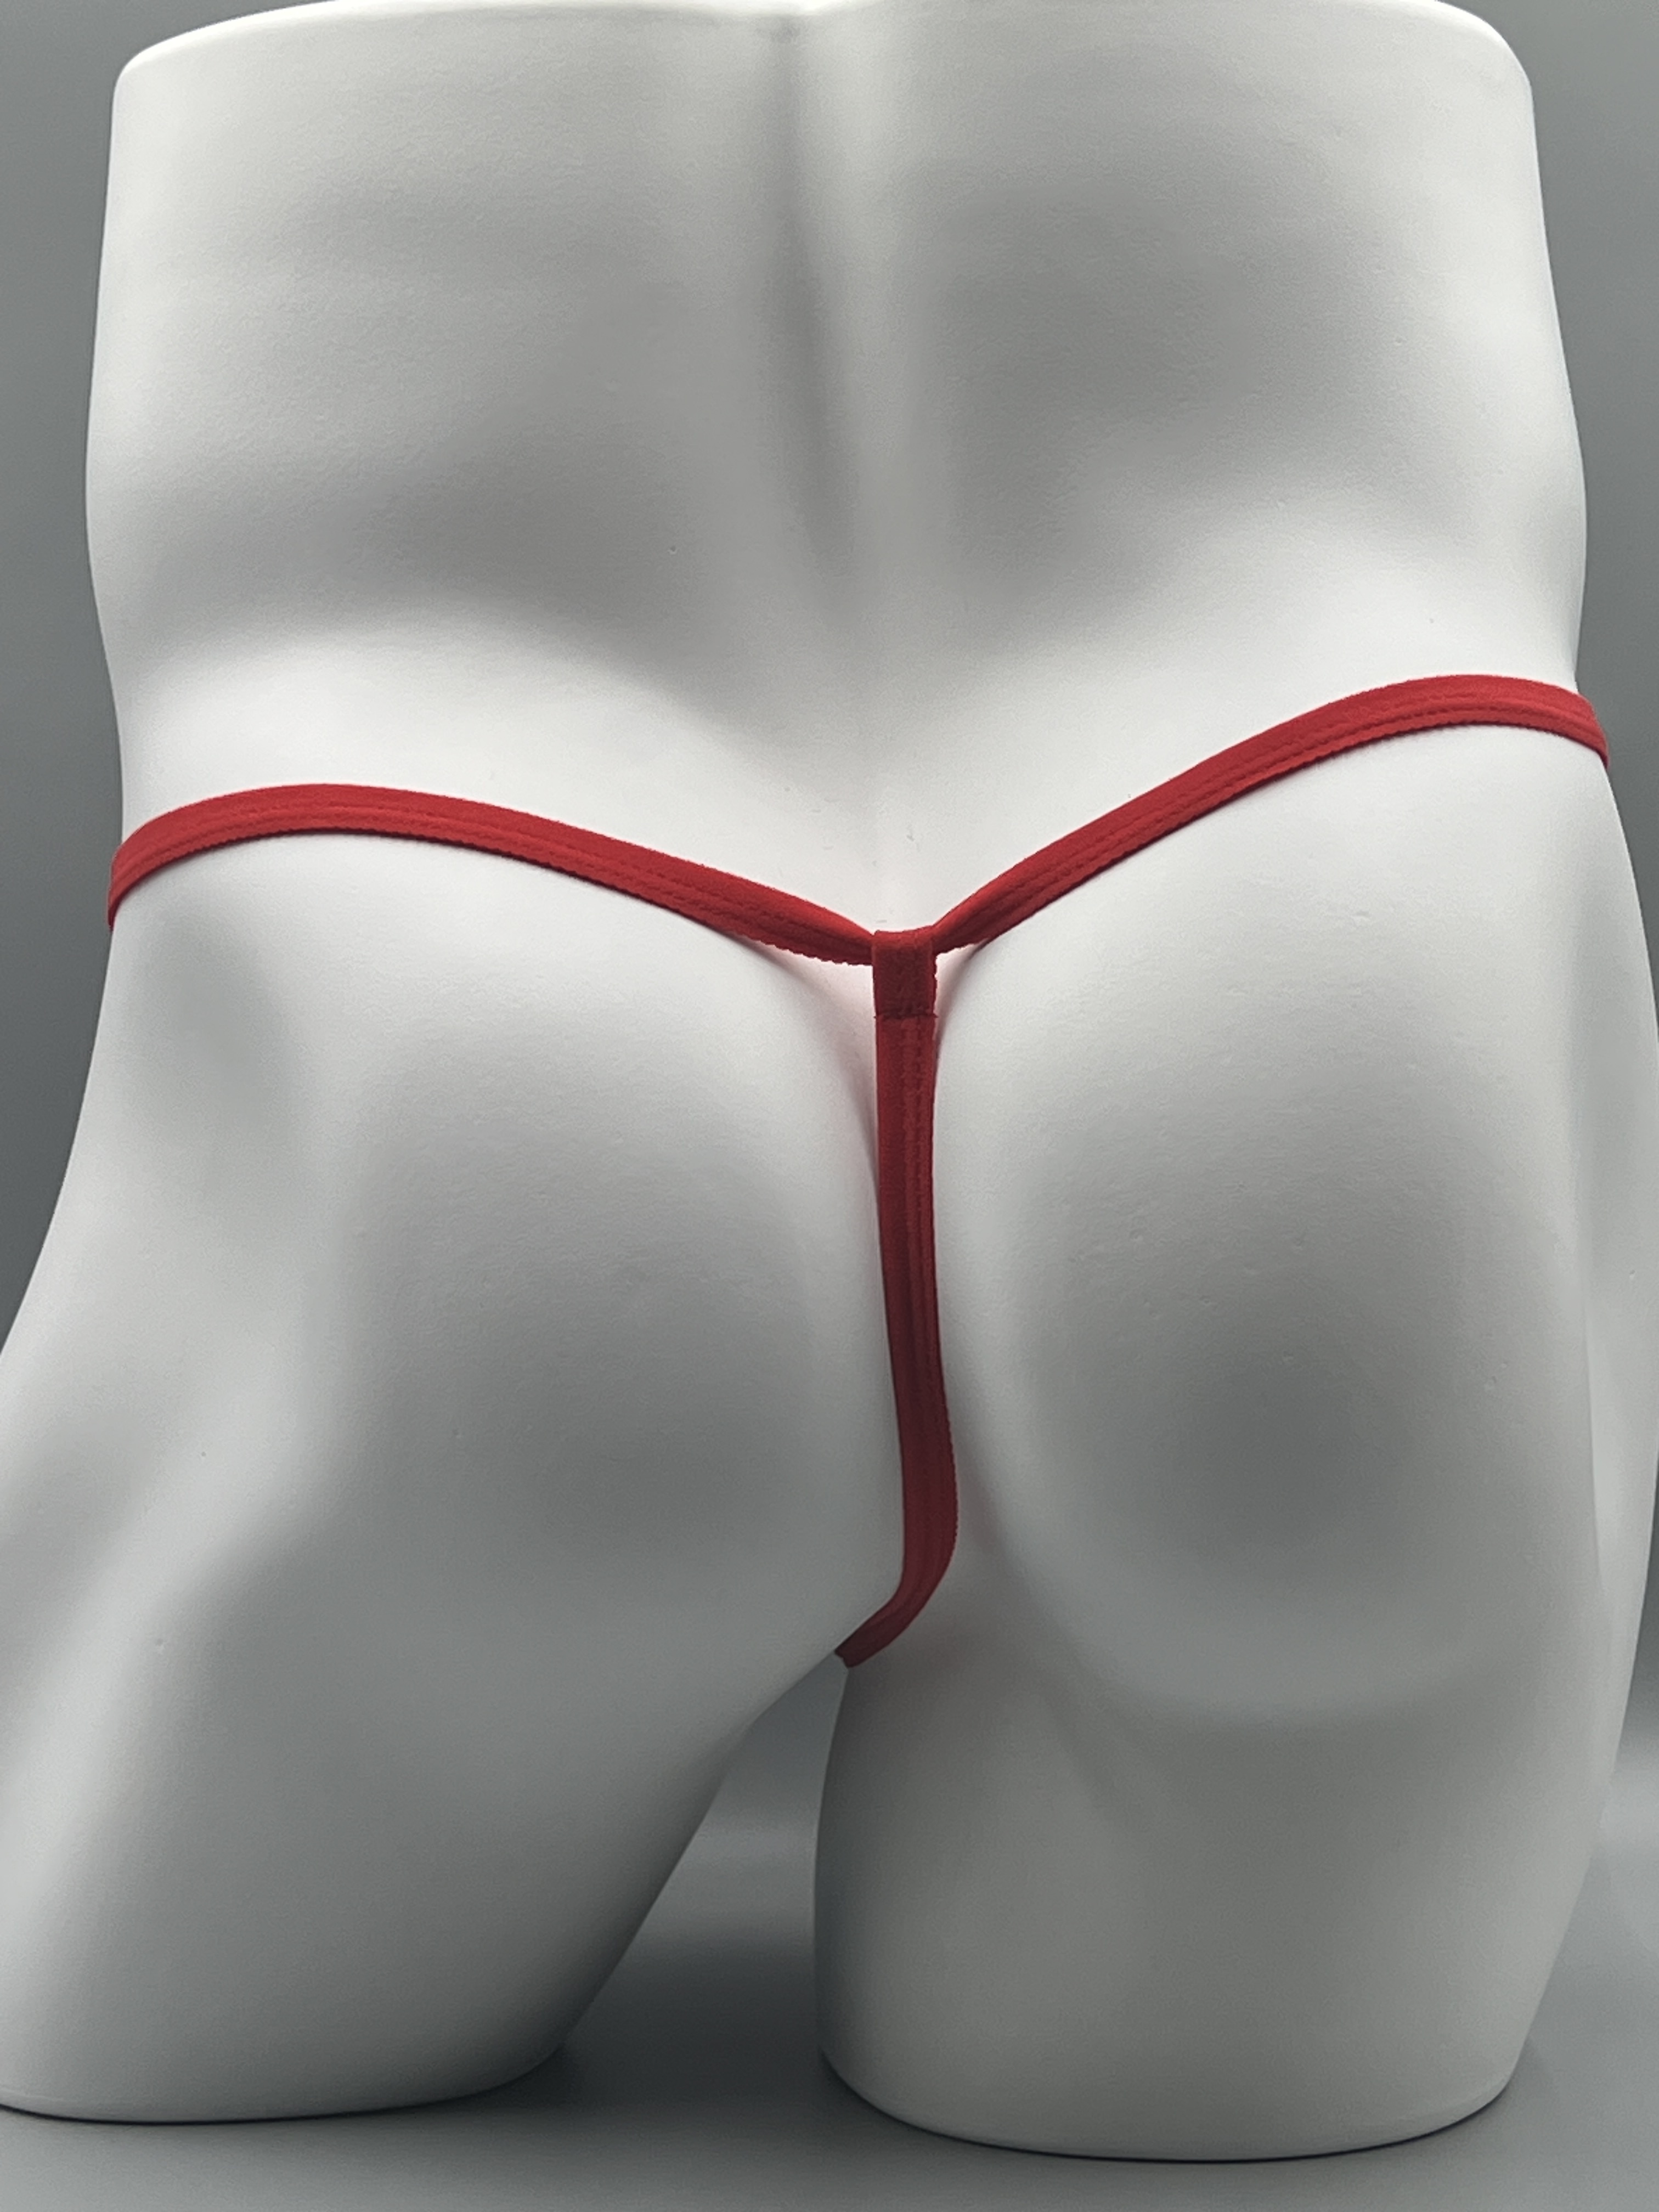 White and Red Couple underwear